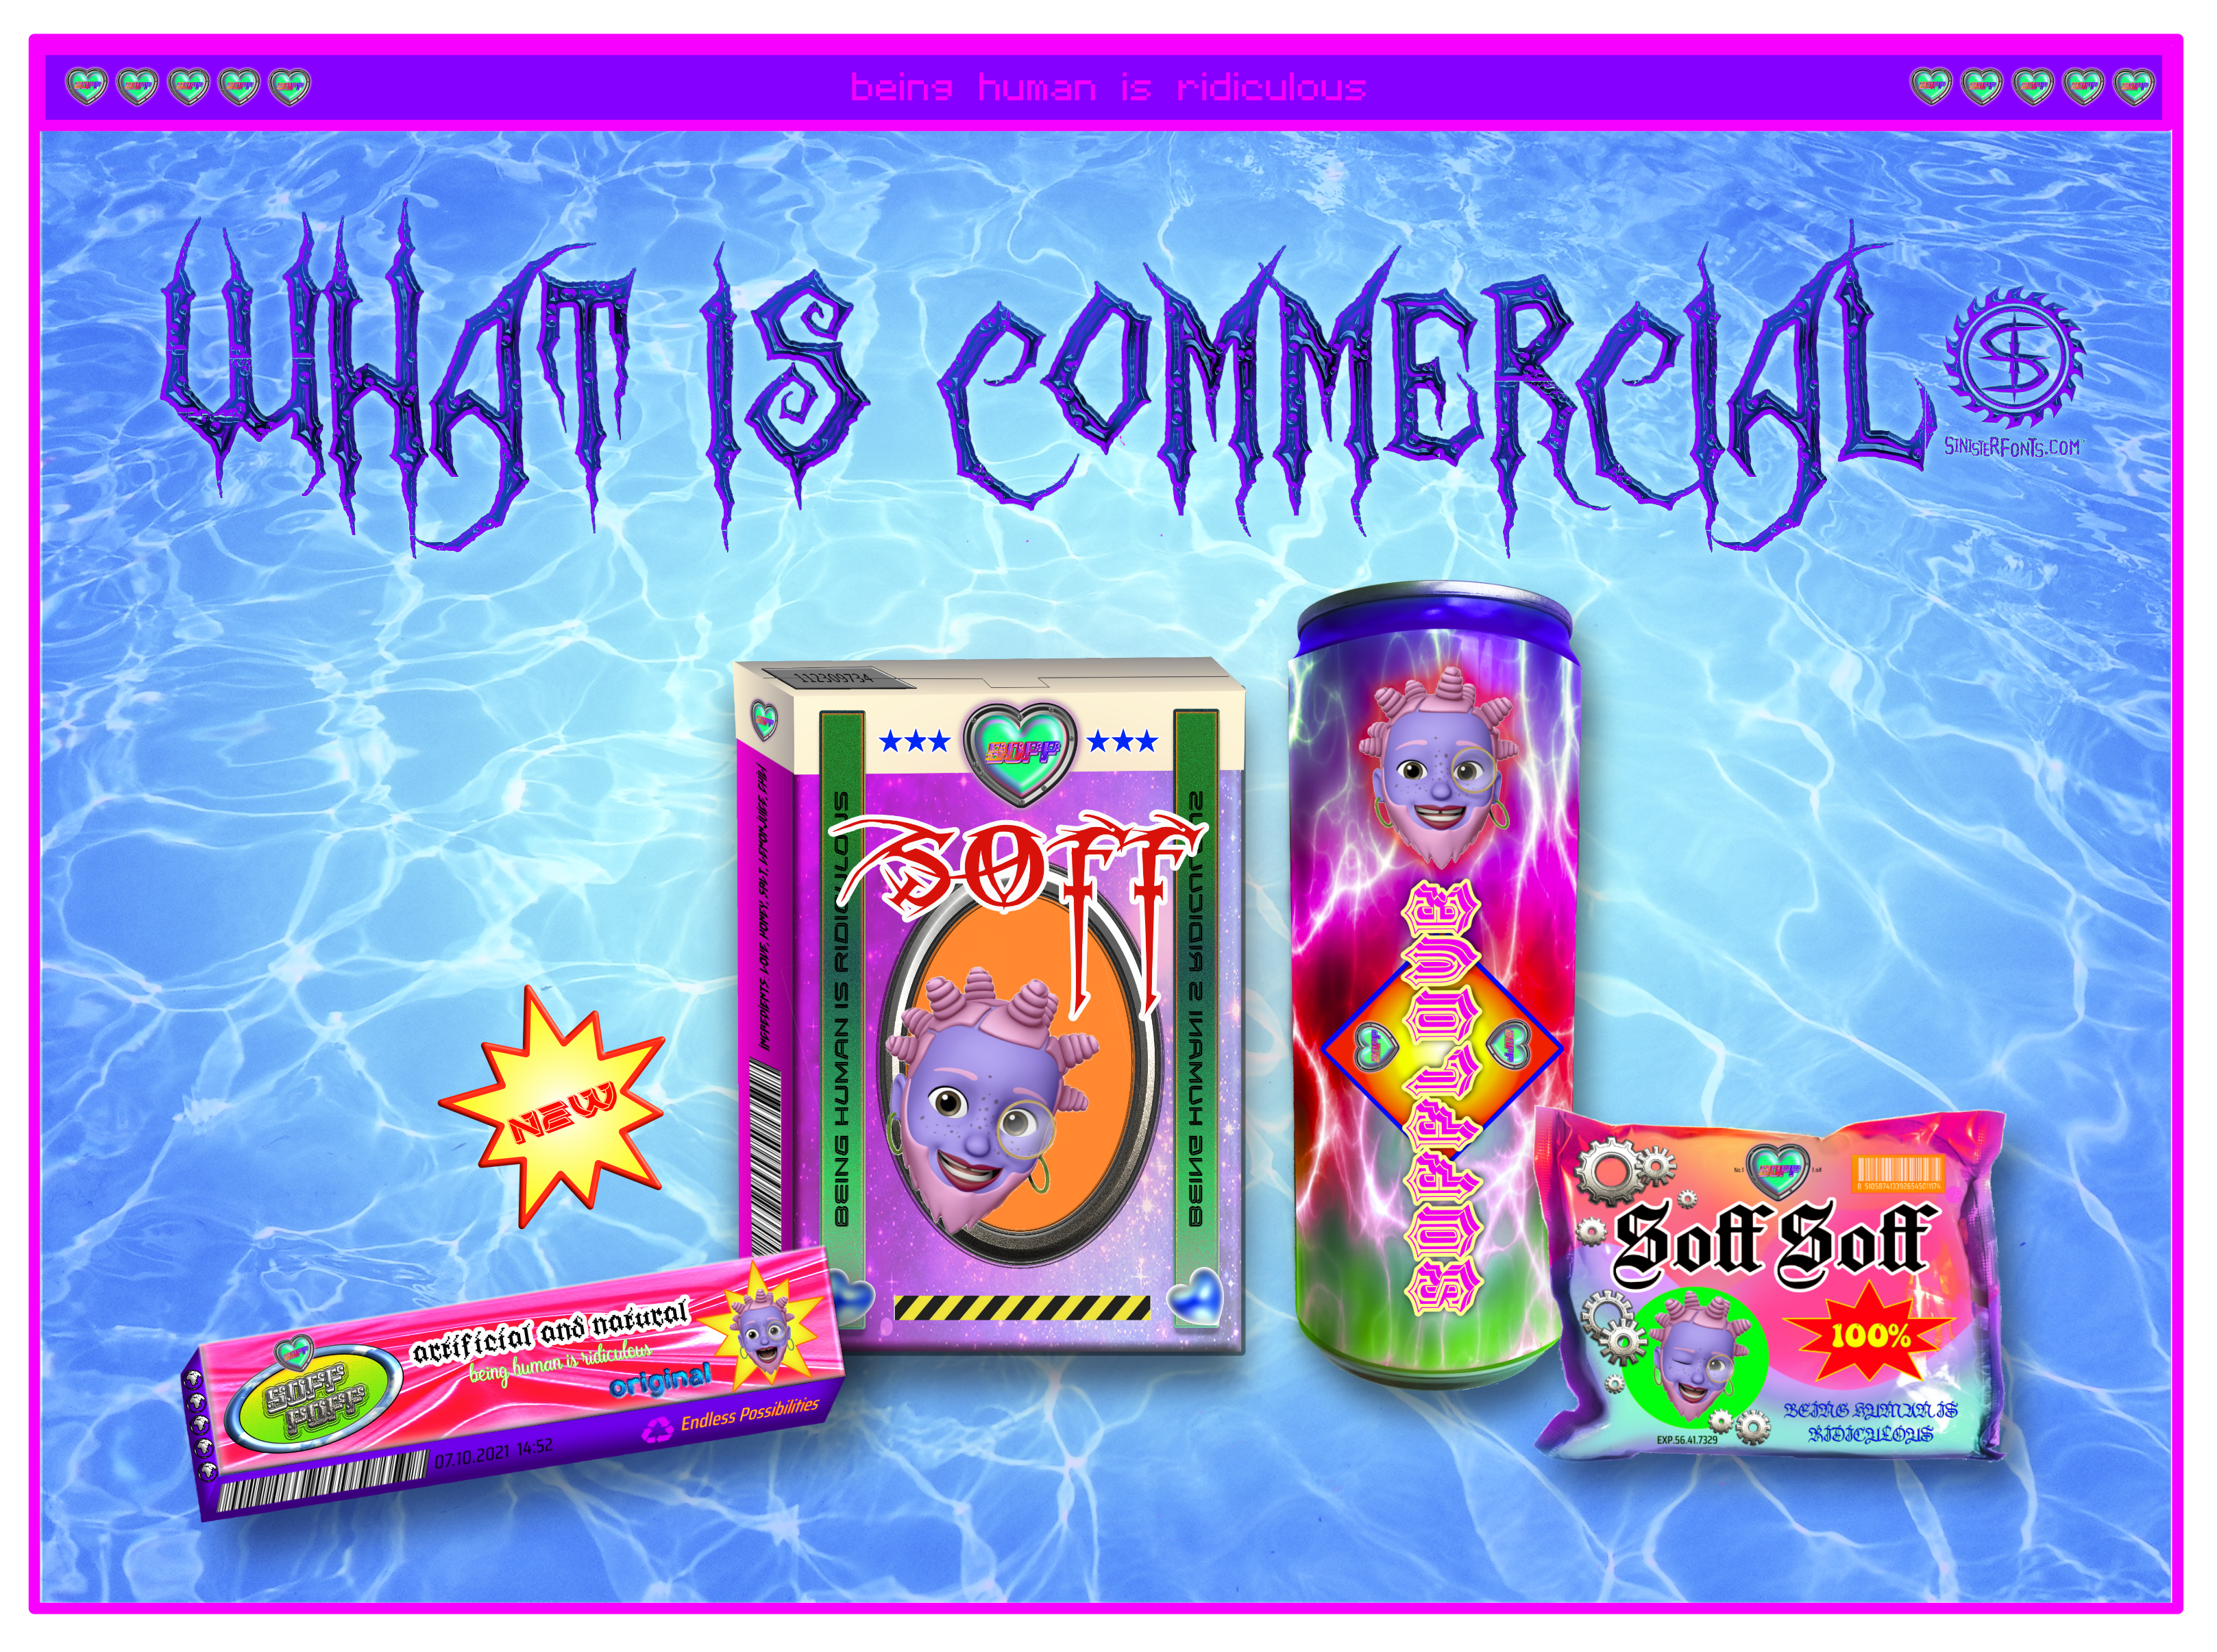 What is commercial?